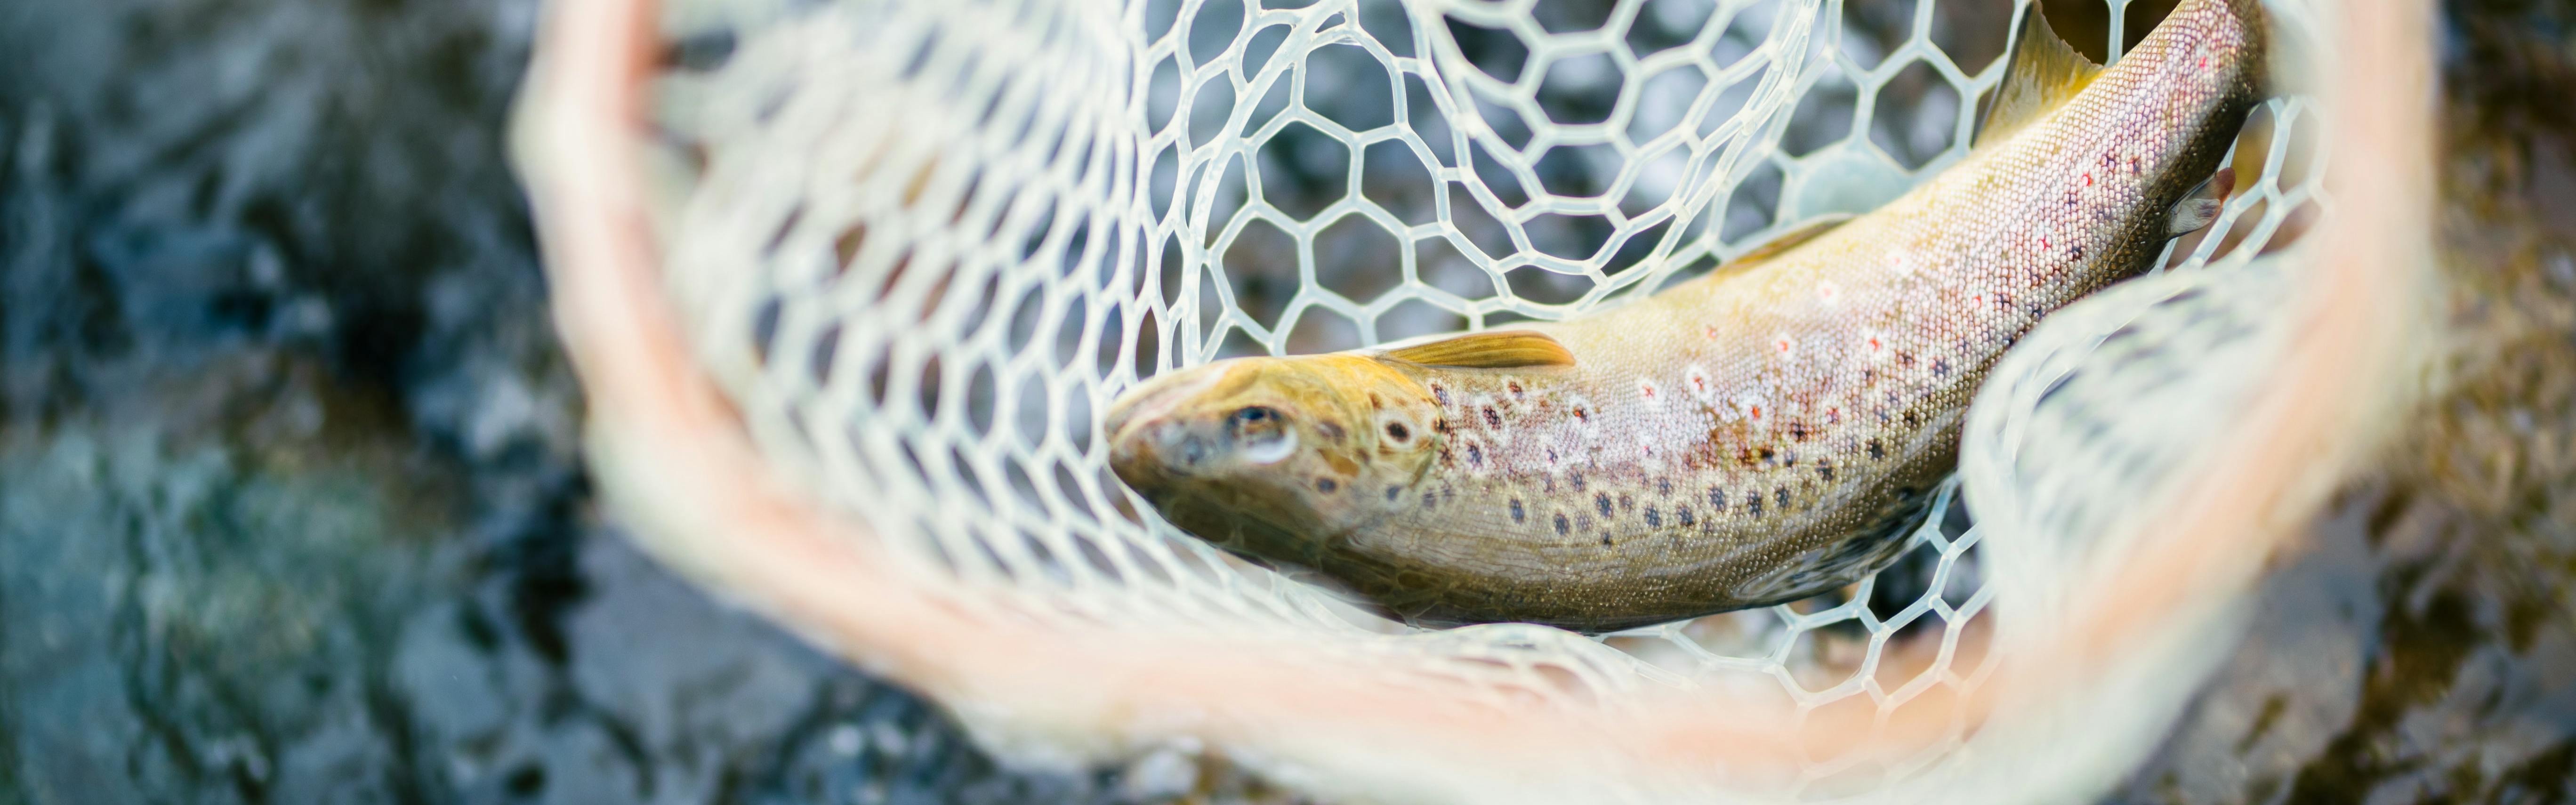 A fish in a net over the water